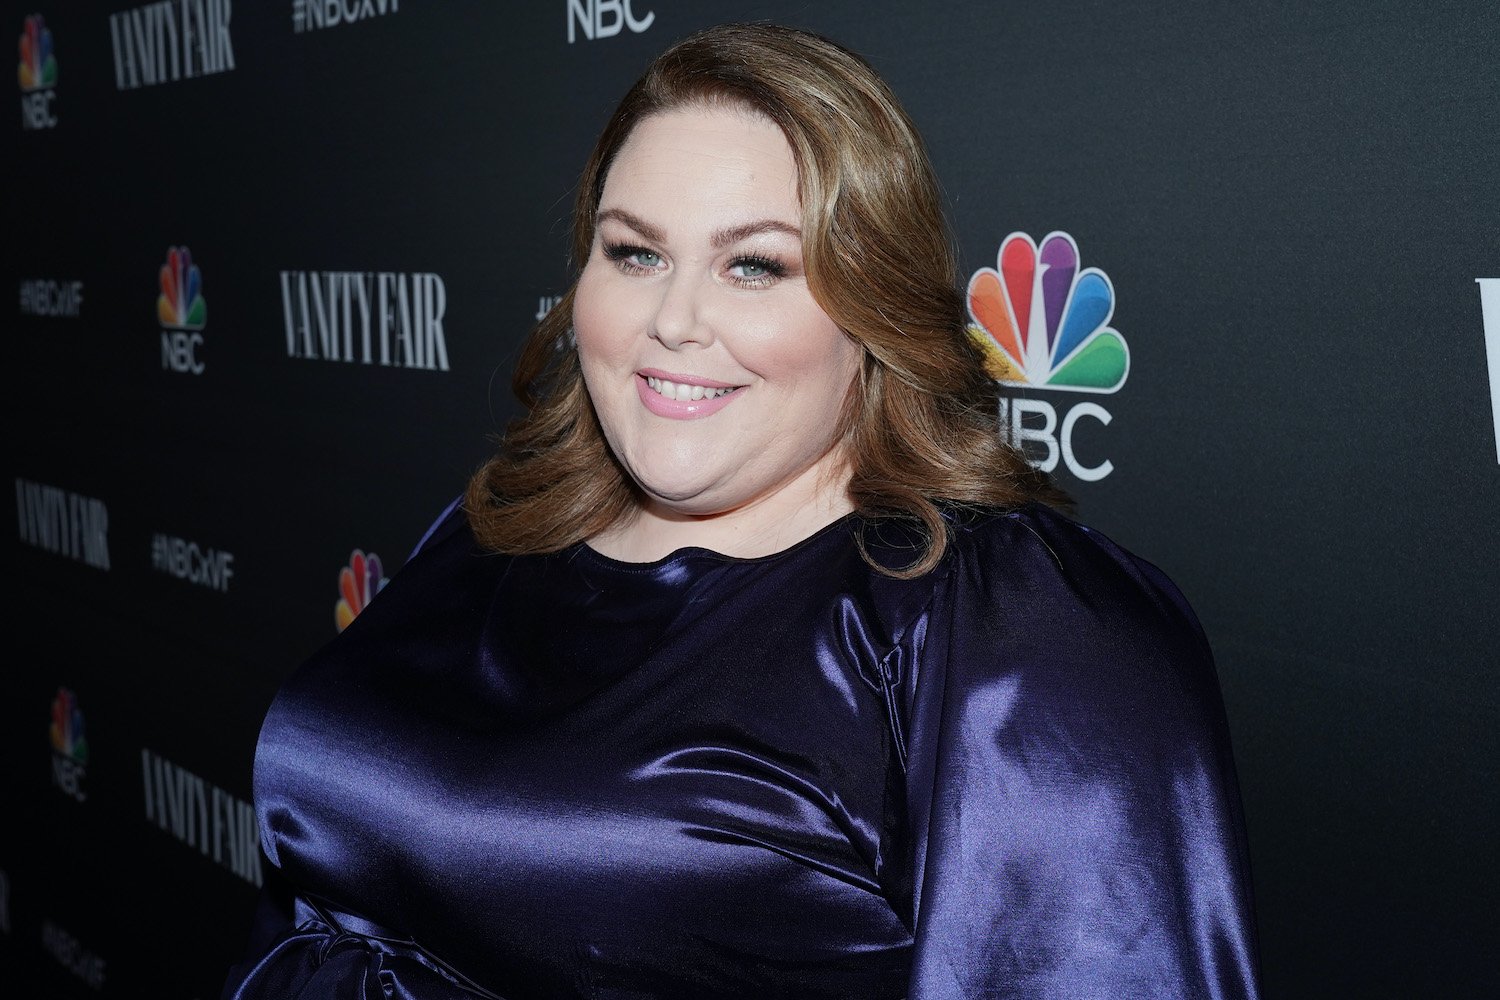 Chrissy Metz smiles as she poses on the red carpet of the NBCUniversal NBC and Vanilty Fair Primetime Party 